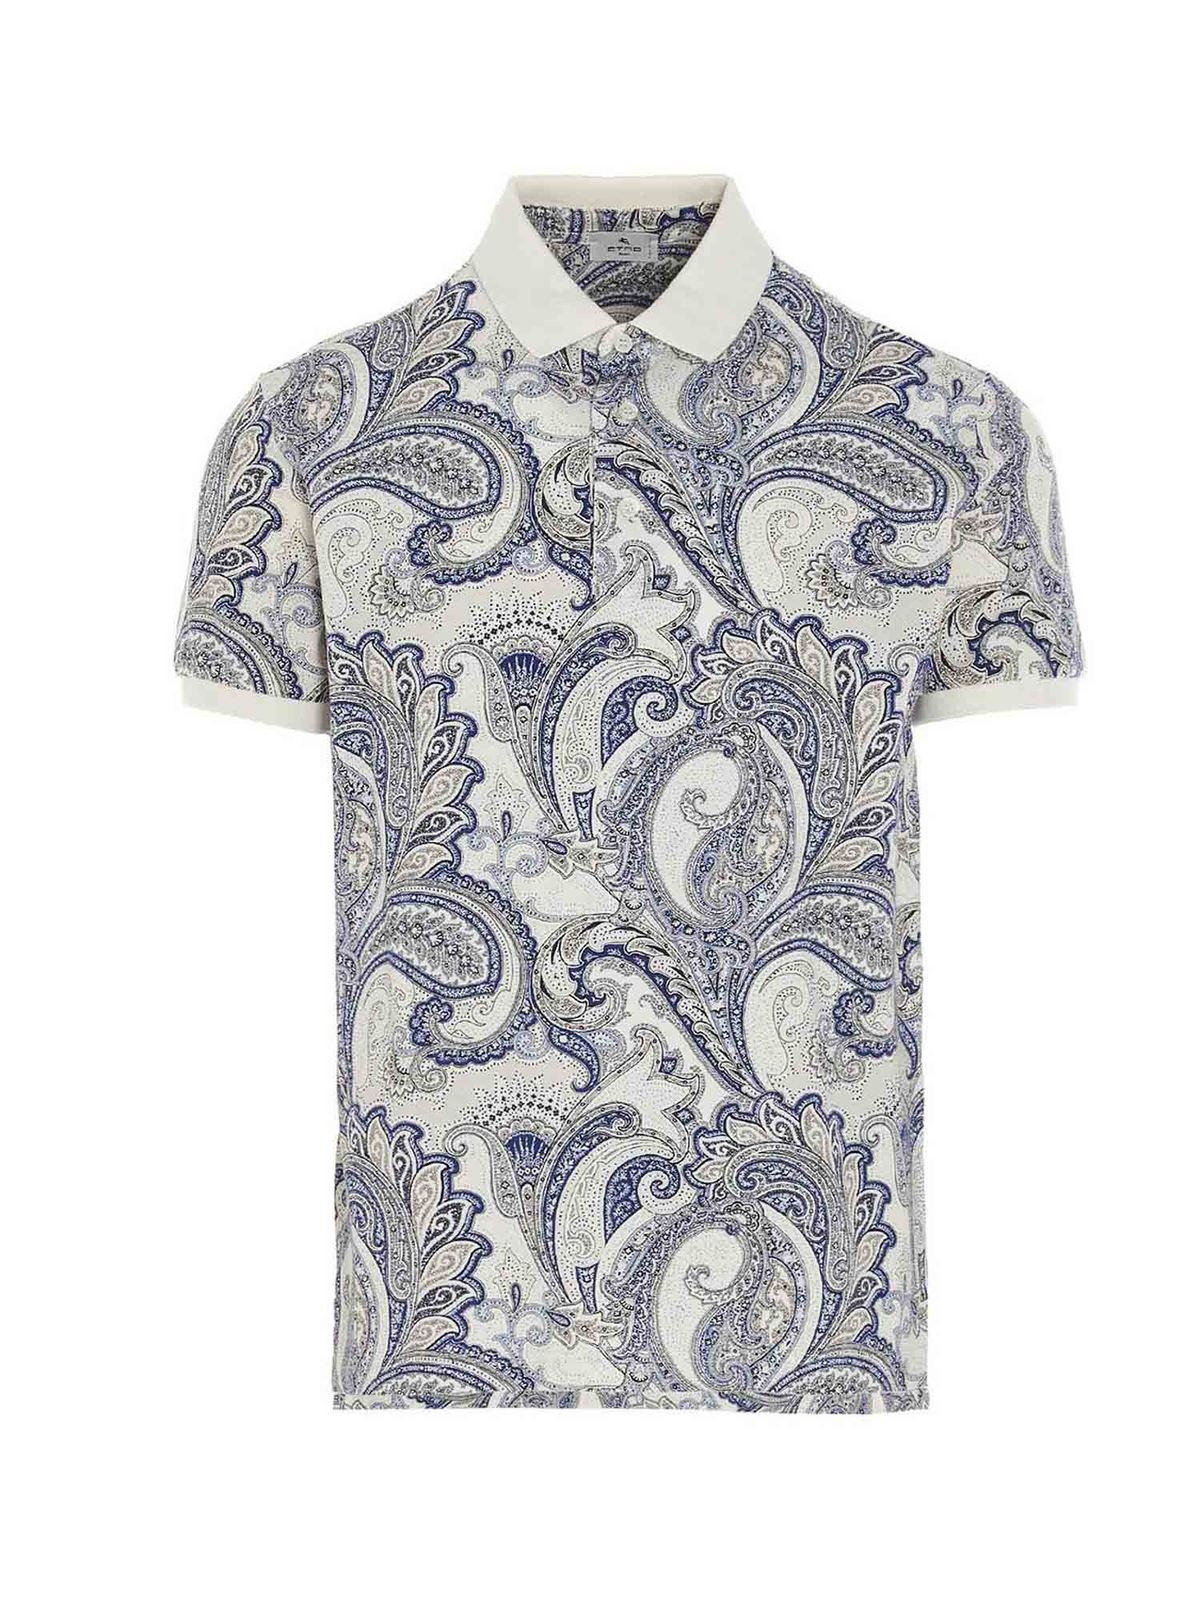 Etro PAISLEY POLO SHIRT IN WHITE AND BLUE